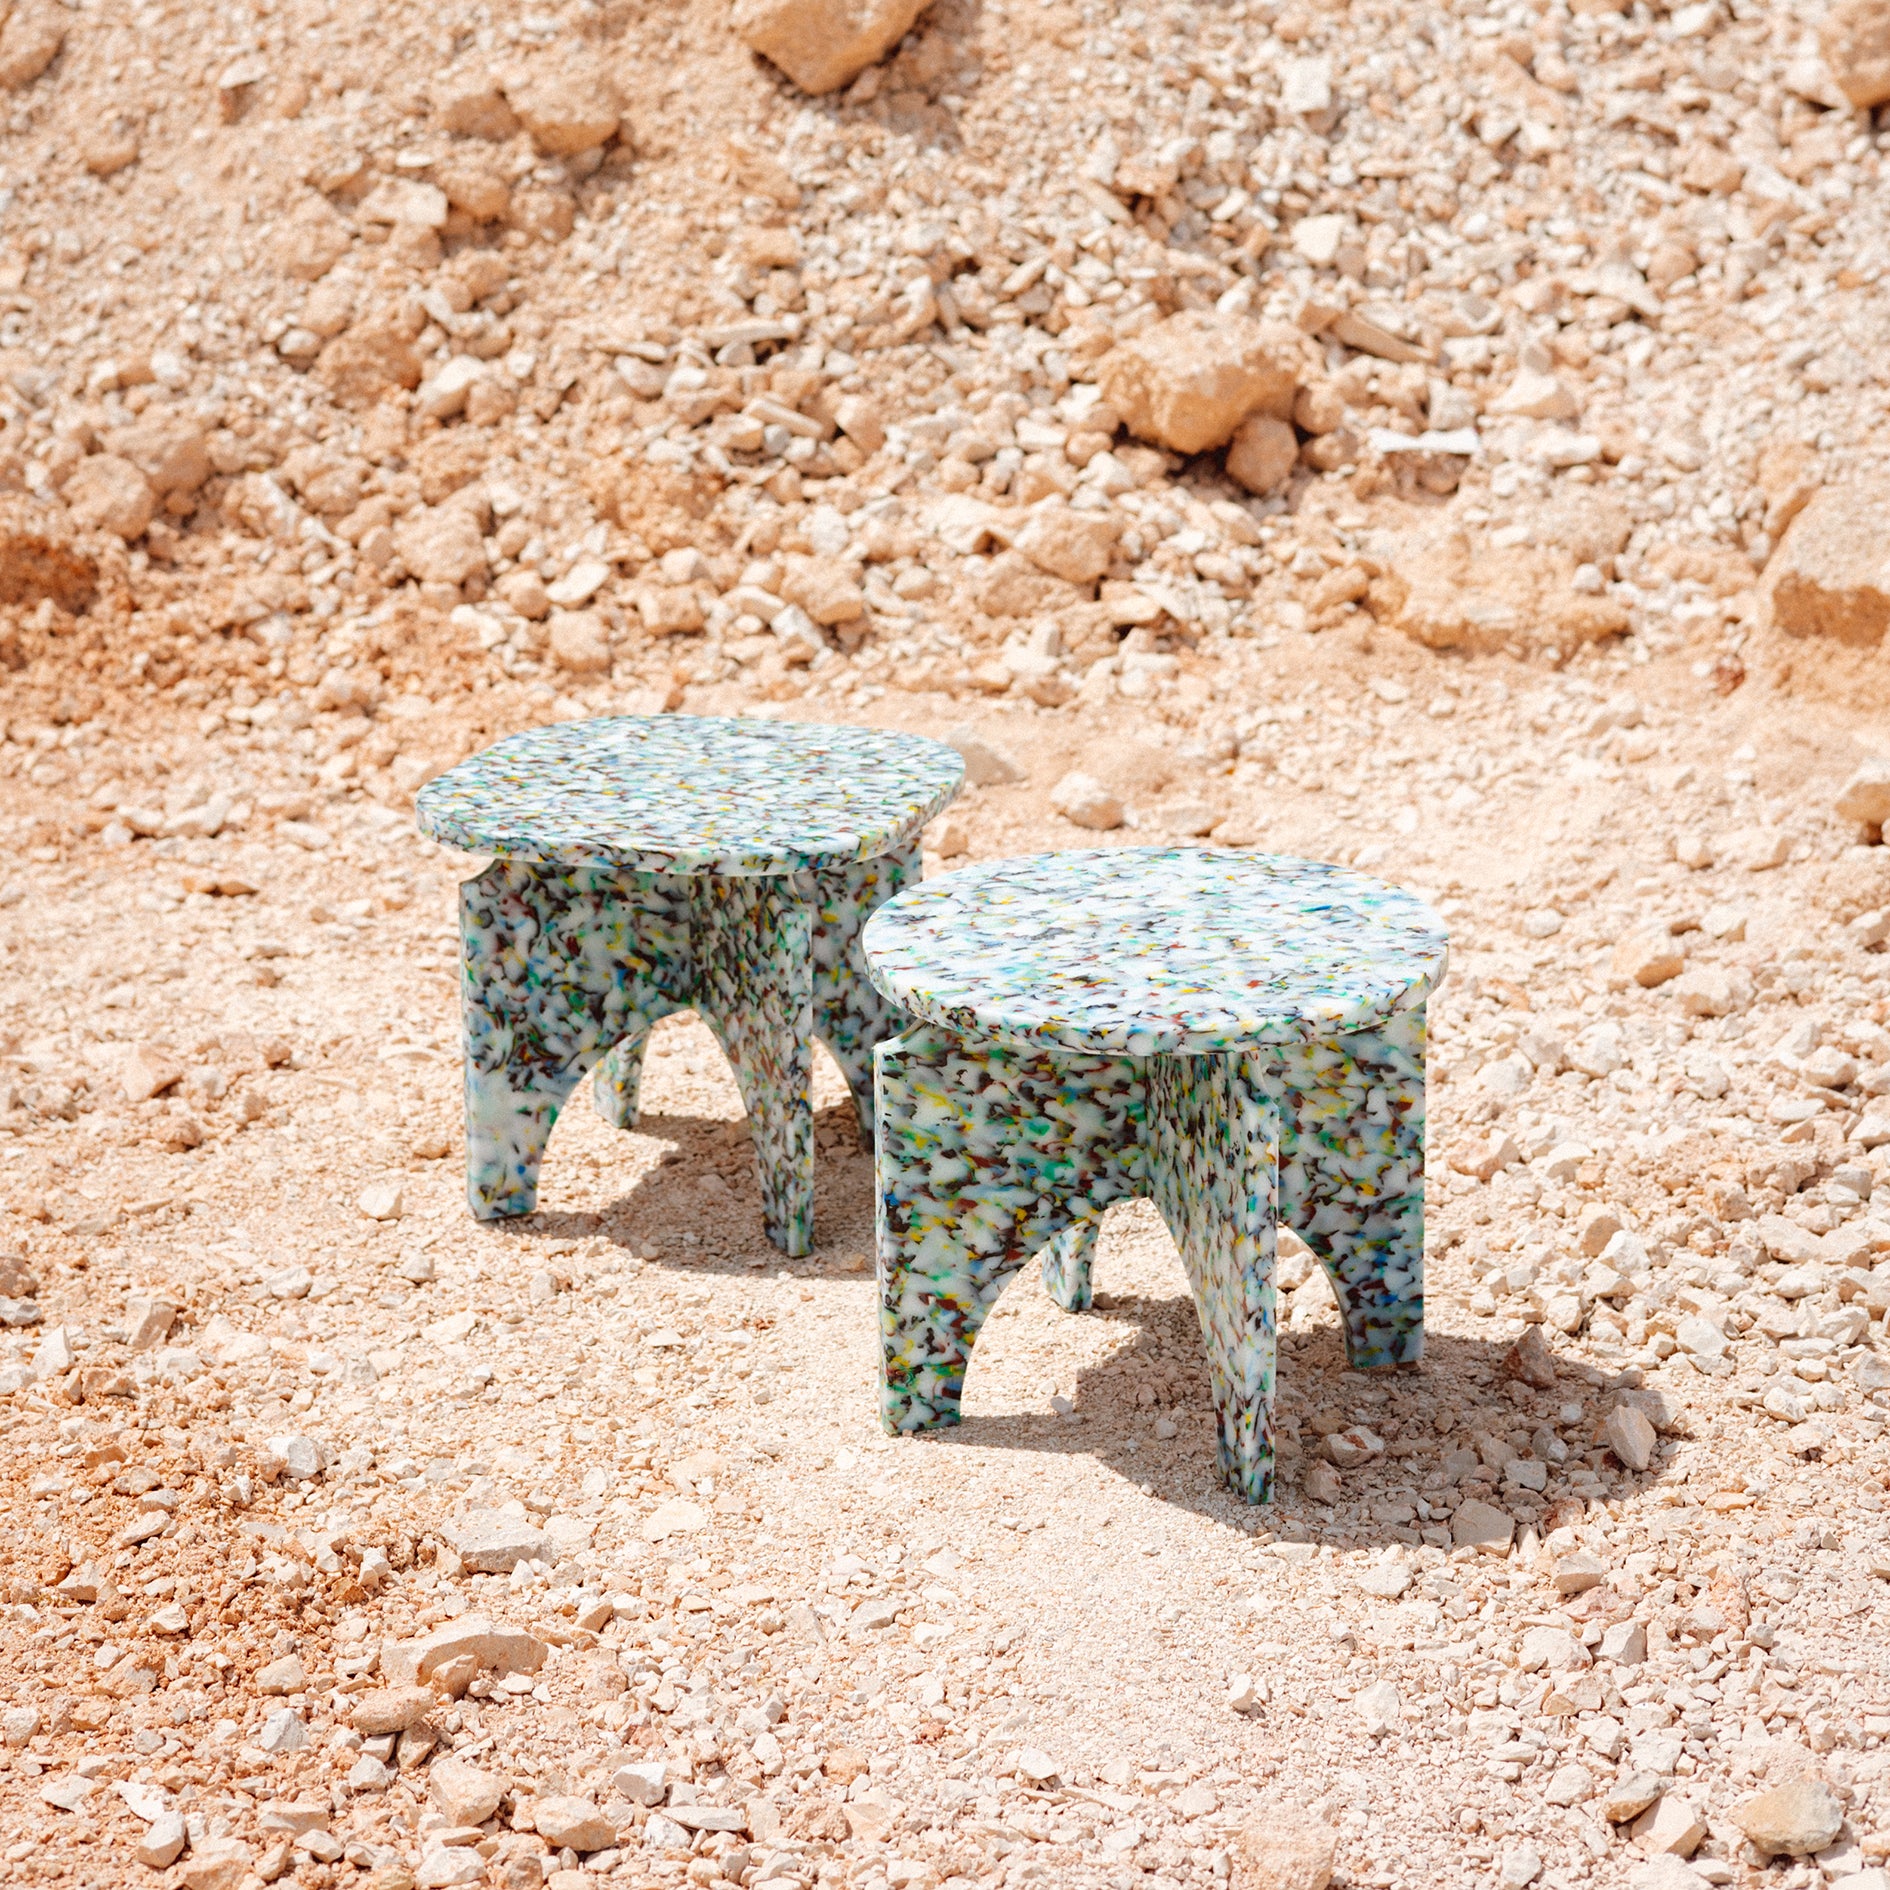 STOOLS BY THE MINIMONO PROJECT - BRAND FOR ECO FRIENDLY - PLAYFUL - MULTI FUNCTIONAL - SUSTAINABLE - HIGH QUALITY - DESIGN FURNITURE FROM RECYCLED PLASTIC FOR BOTH ADULT AND CHILDREN MADE IN BERLIN GERMANY